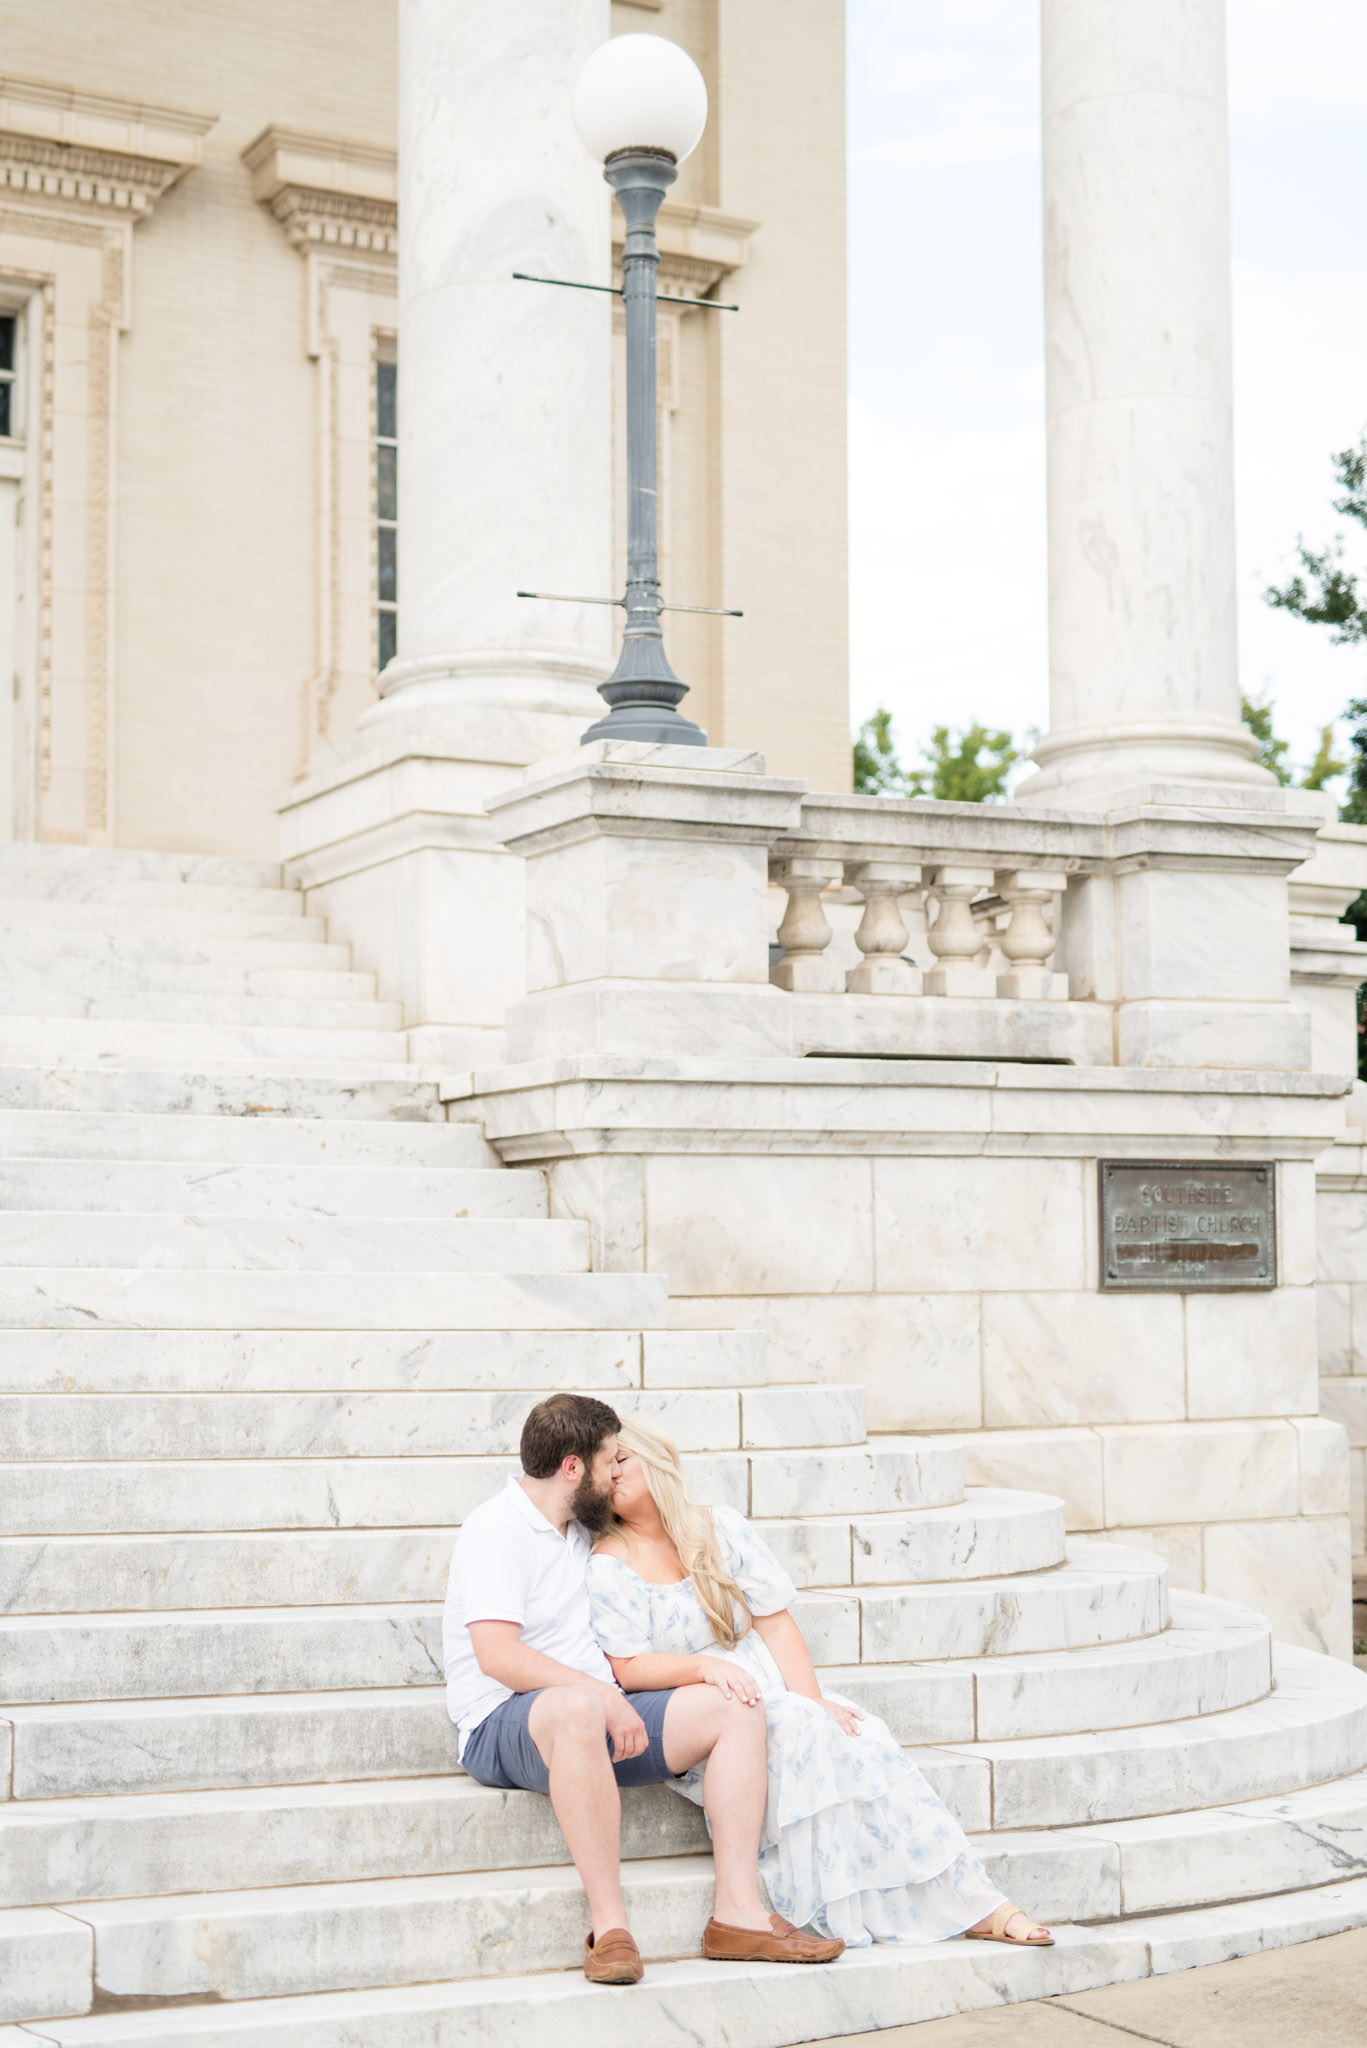 Husband and Wife kiss while sitting on stairs.